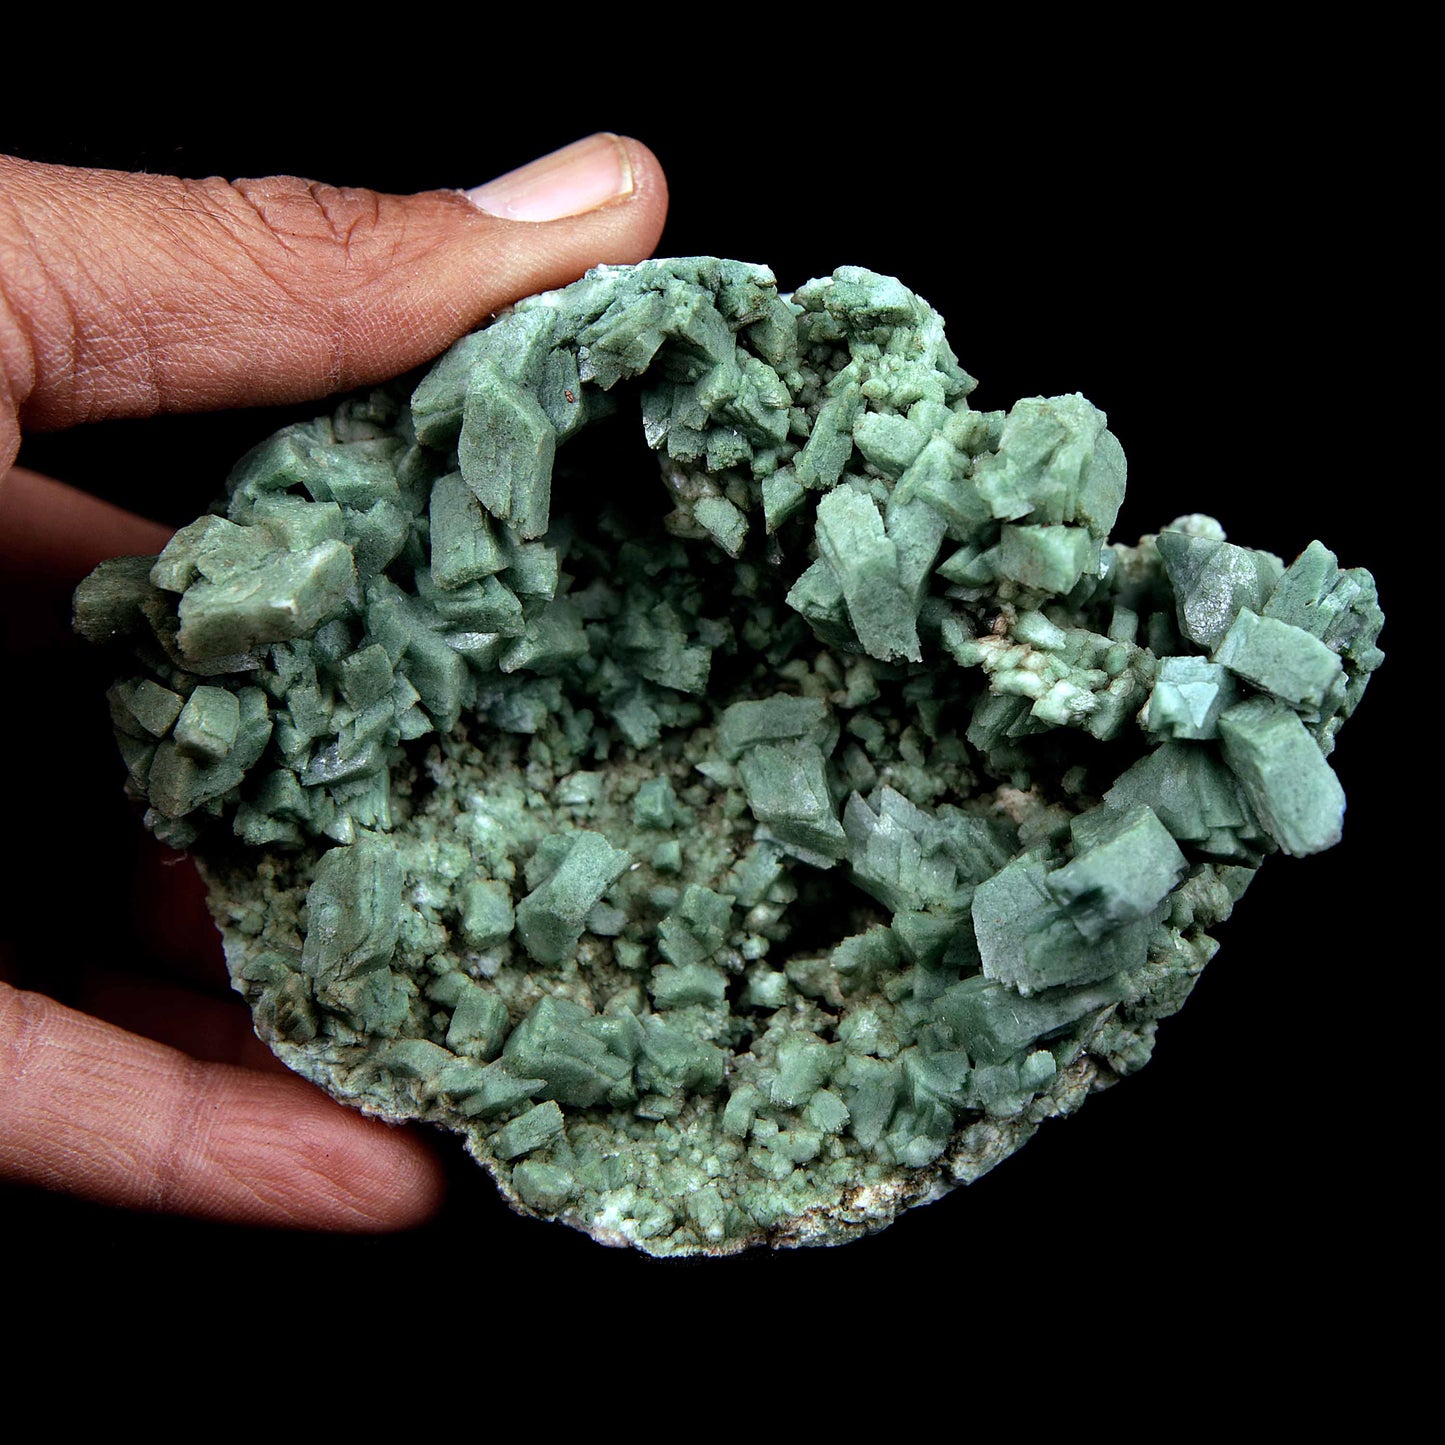 Heulandite Big Cluster Natural Mineral Specimen # B 3988  https://www.superbminerals.us/products/heulandite-big-cluster-natural-mineral-specimen-b-3988  Features Large cluster of lustrous translucent green heulandite crystals fully crystallized on all sides of the specimen with only thin attachment points. The heulandite crystals are colored green by microscopic celadonite inclusions and coating.